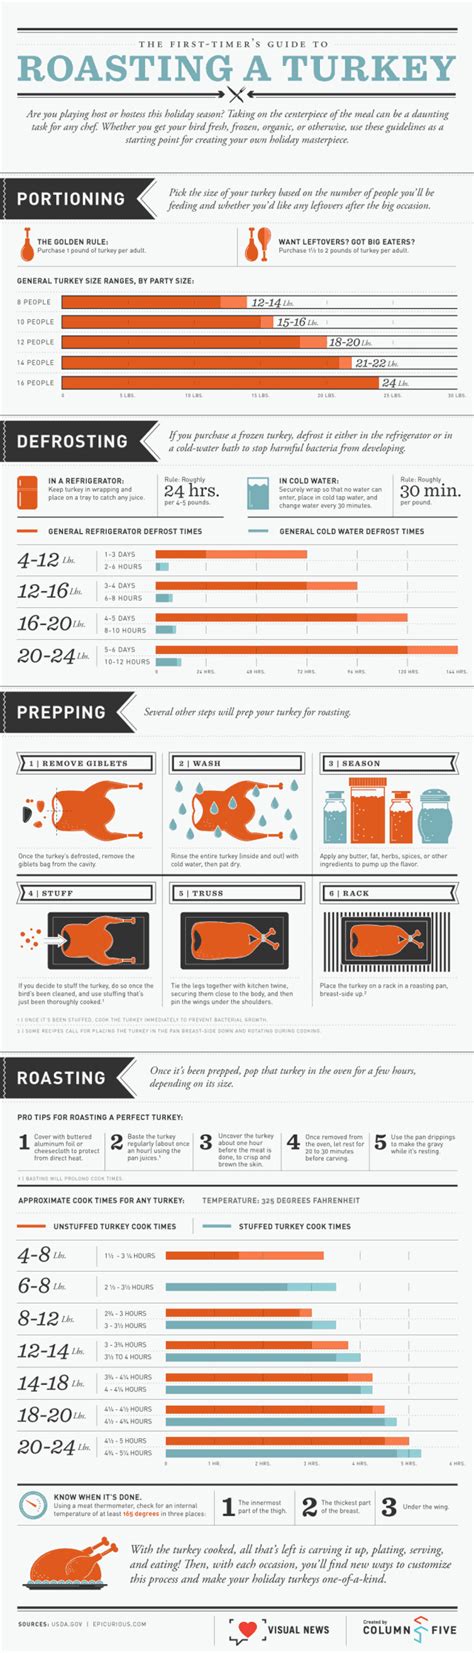 roasting a turkey daily infographic